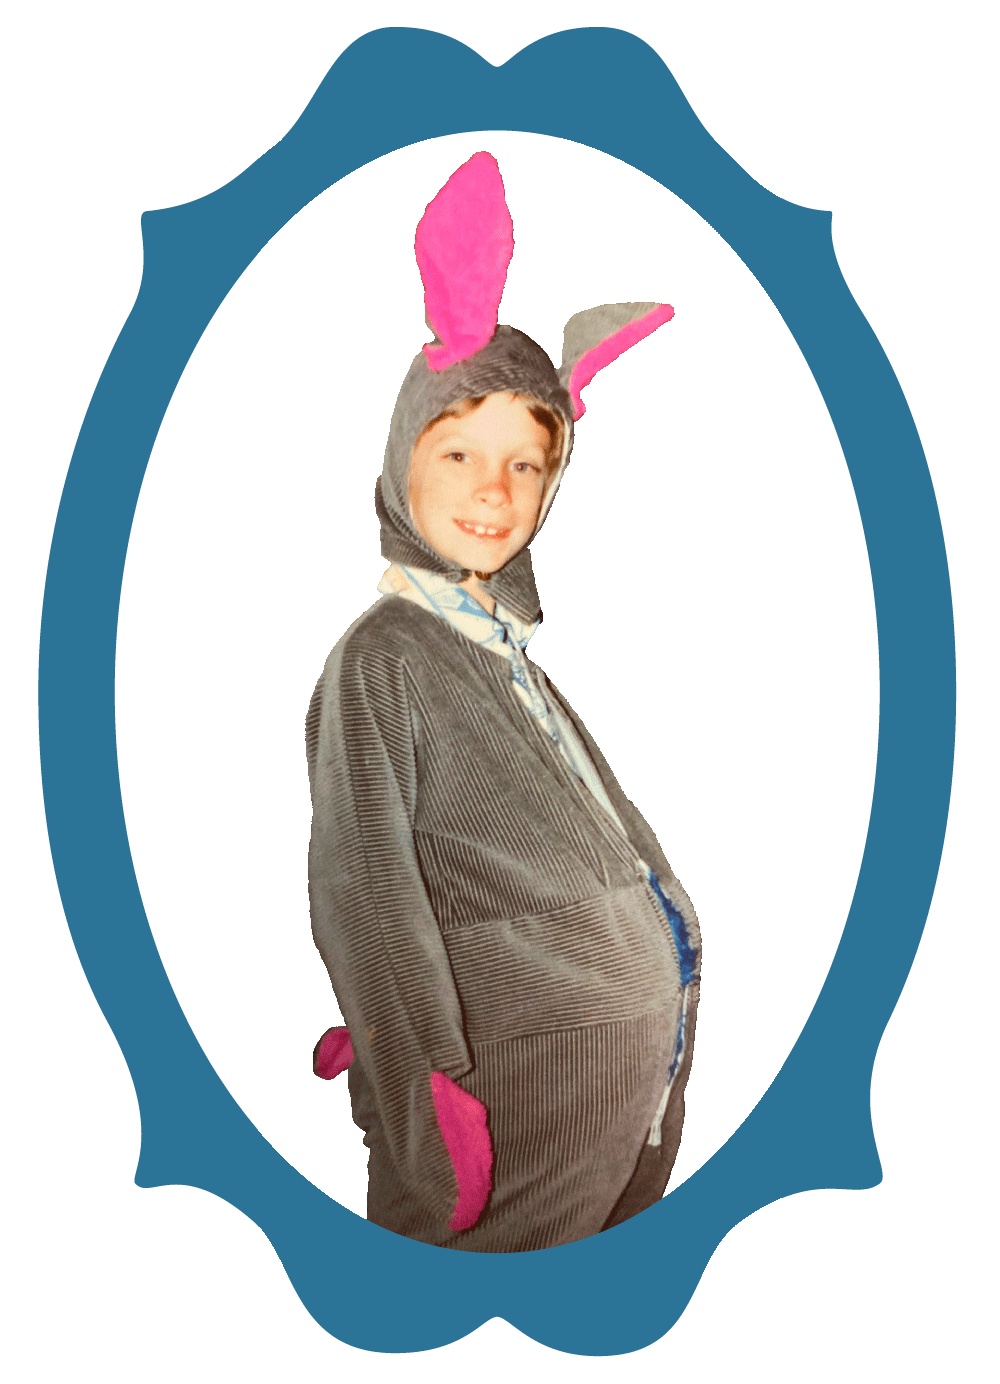 Mike as a kid wearing a grey bunny suit, with pink ears and gloves, smiling at the camera.